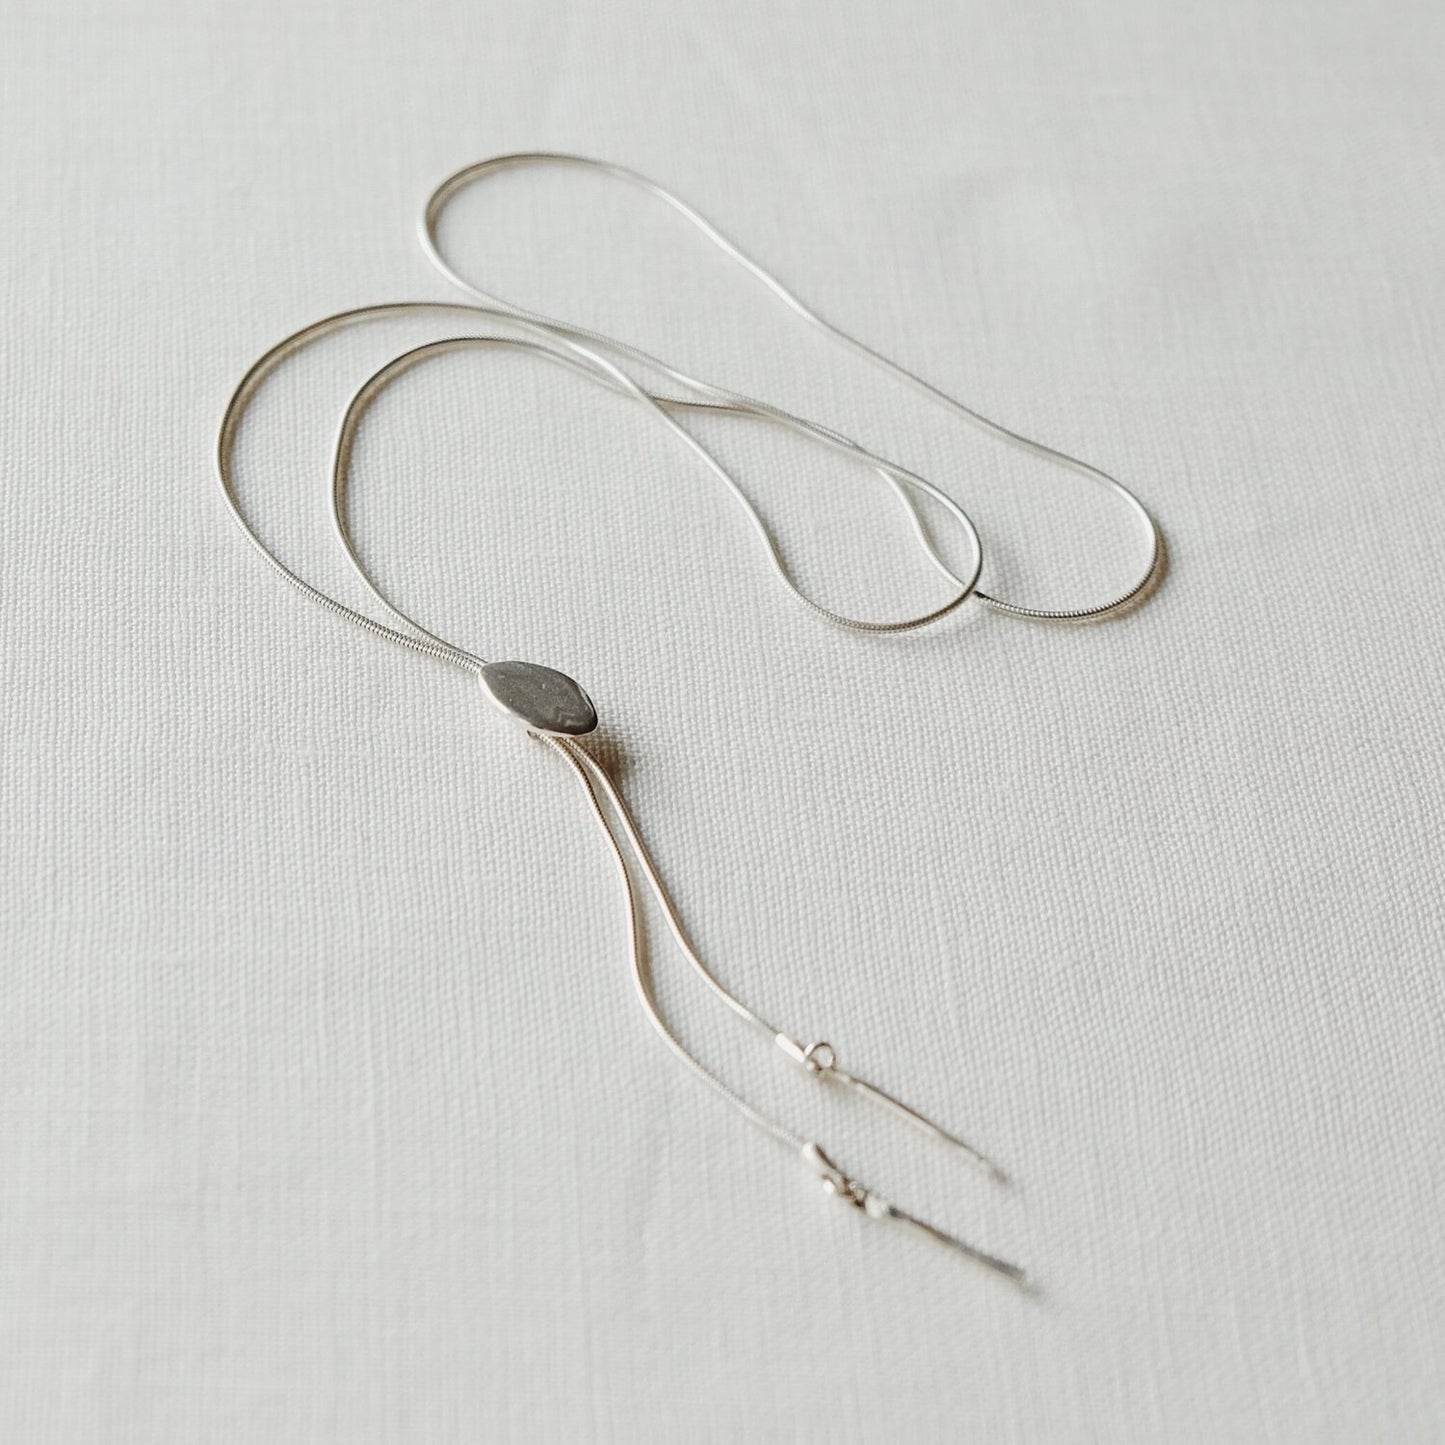 ascent sterling silver bolo tie / An understated but sexy little necklace. Tiny oval charm slides like a bolo tie with two hammered drops at the ends.   Handmade by Sarah Safavi.